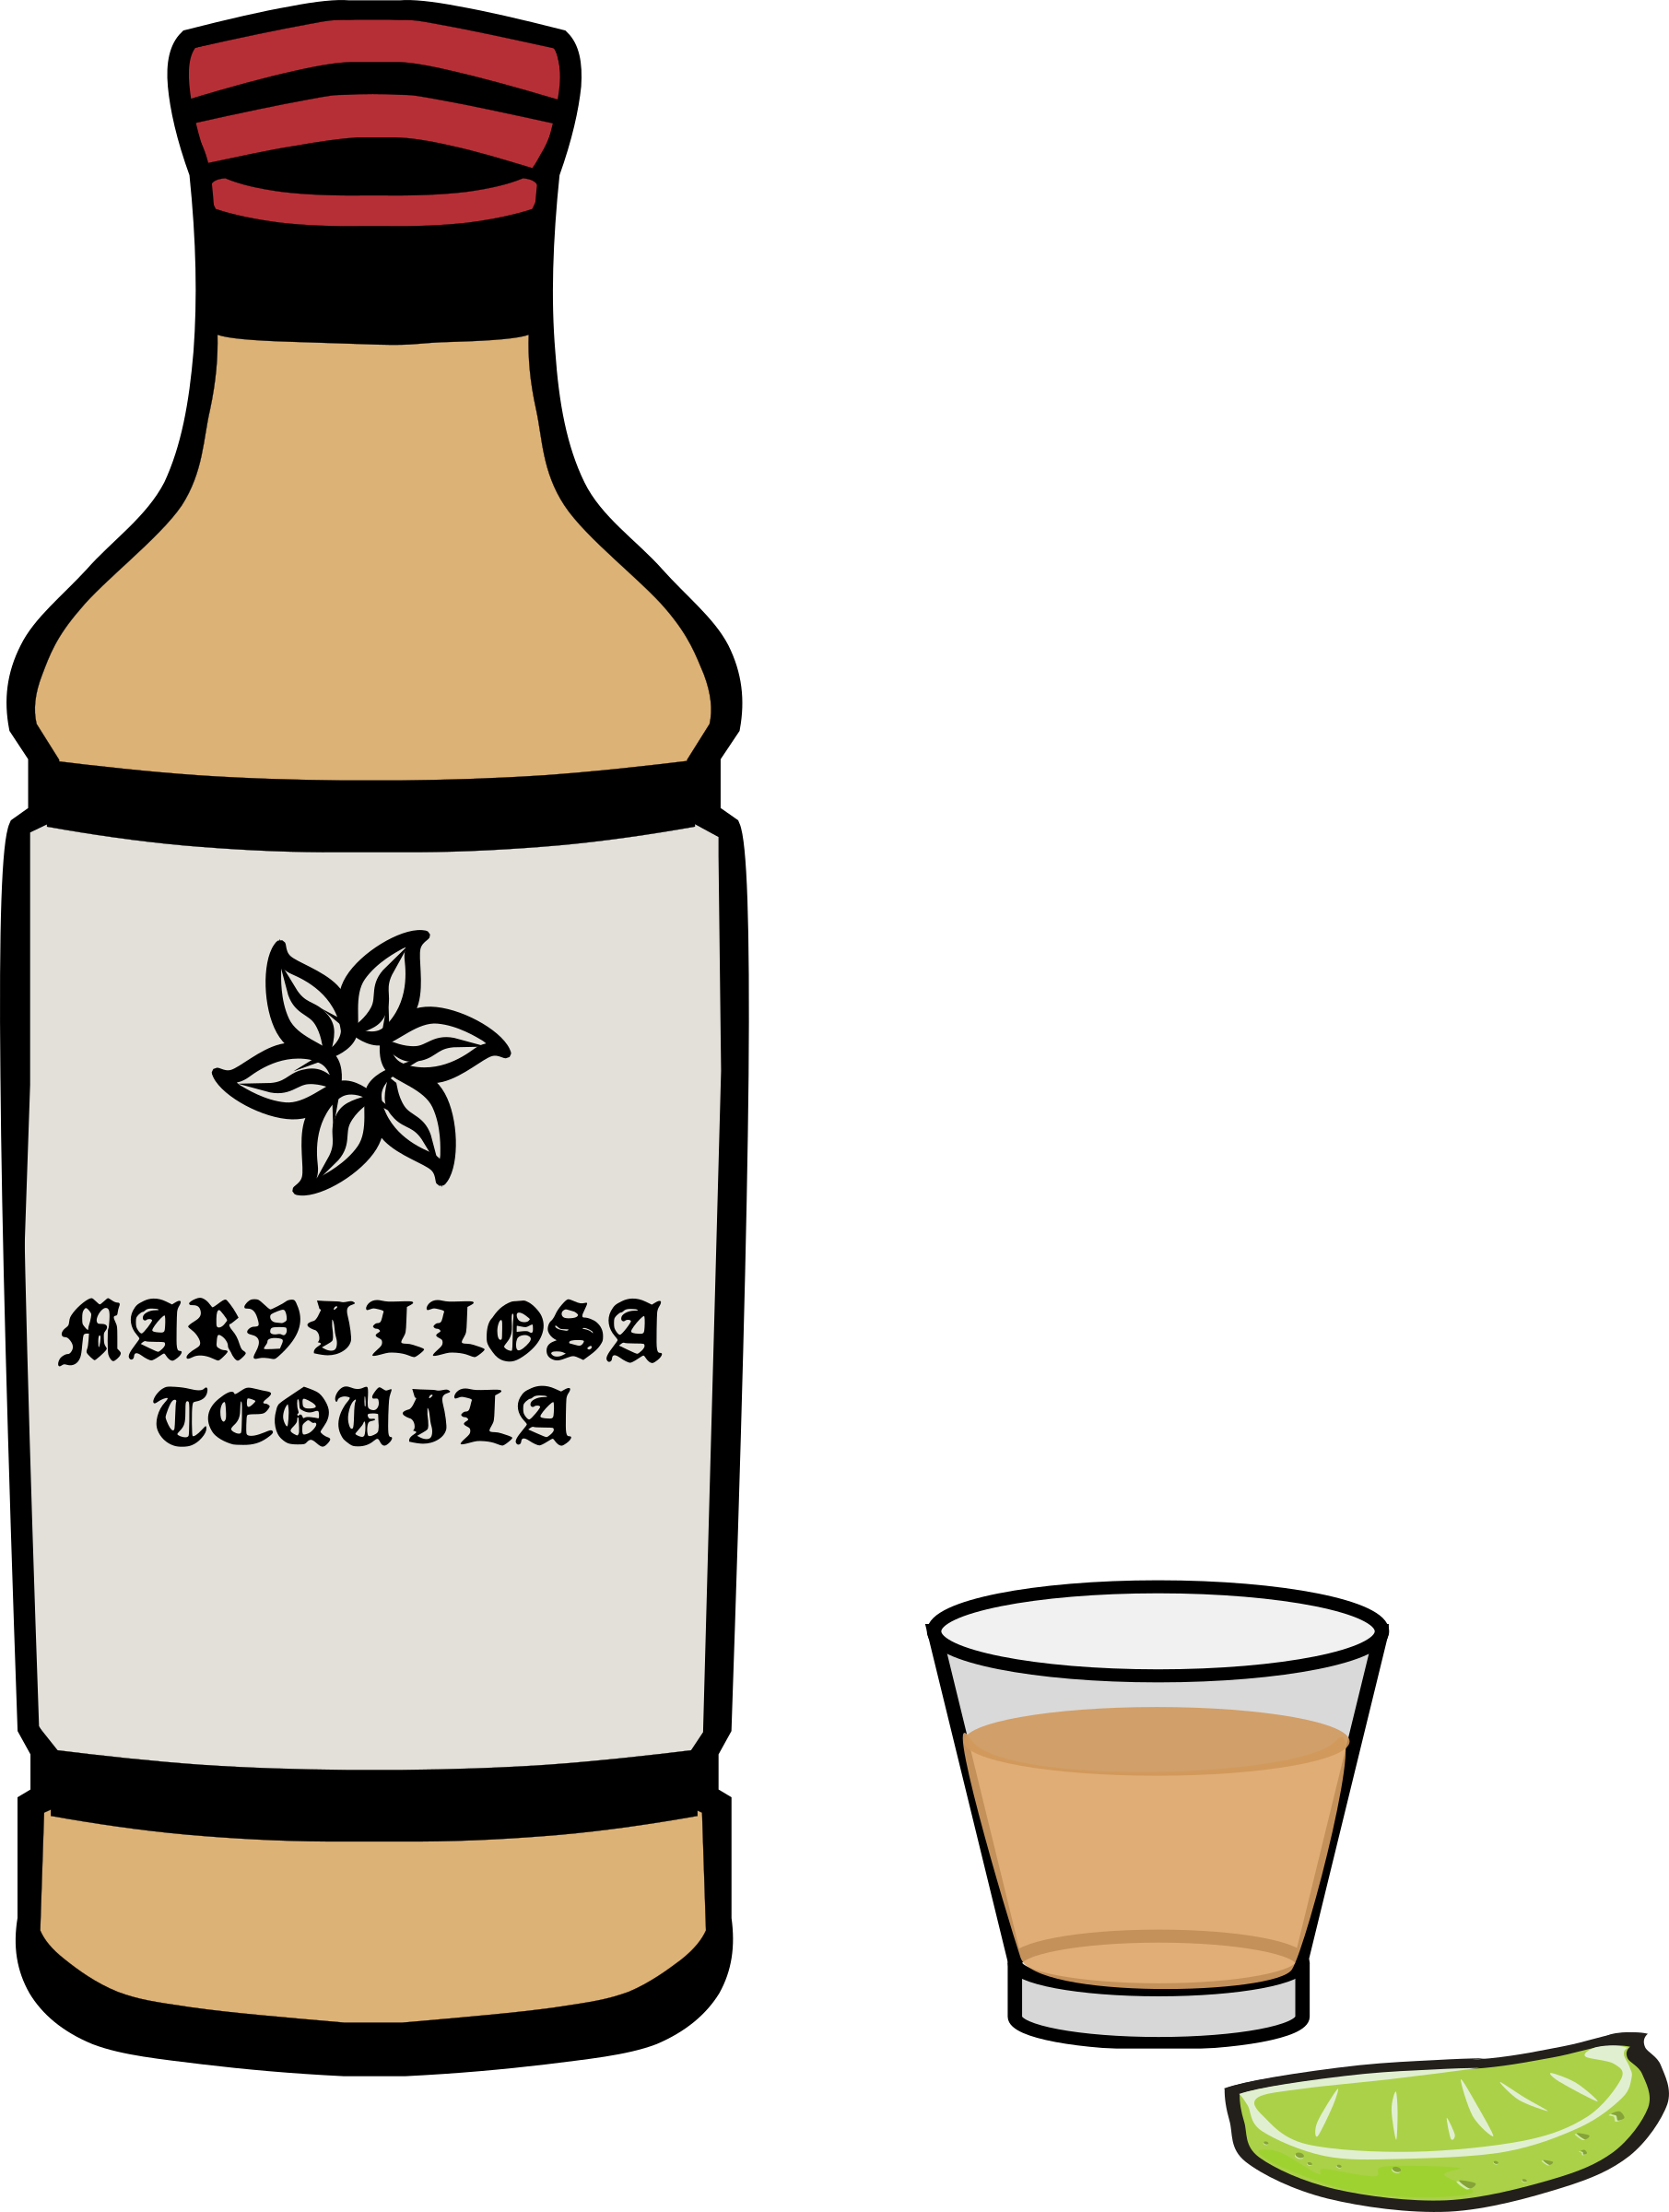 1811x2400 Tequila Bottle And Glass Vector Clipart Image.